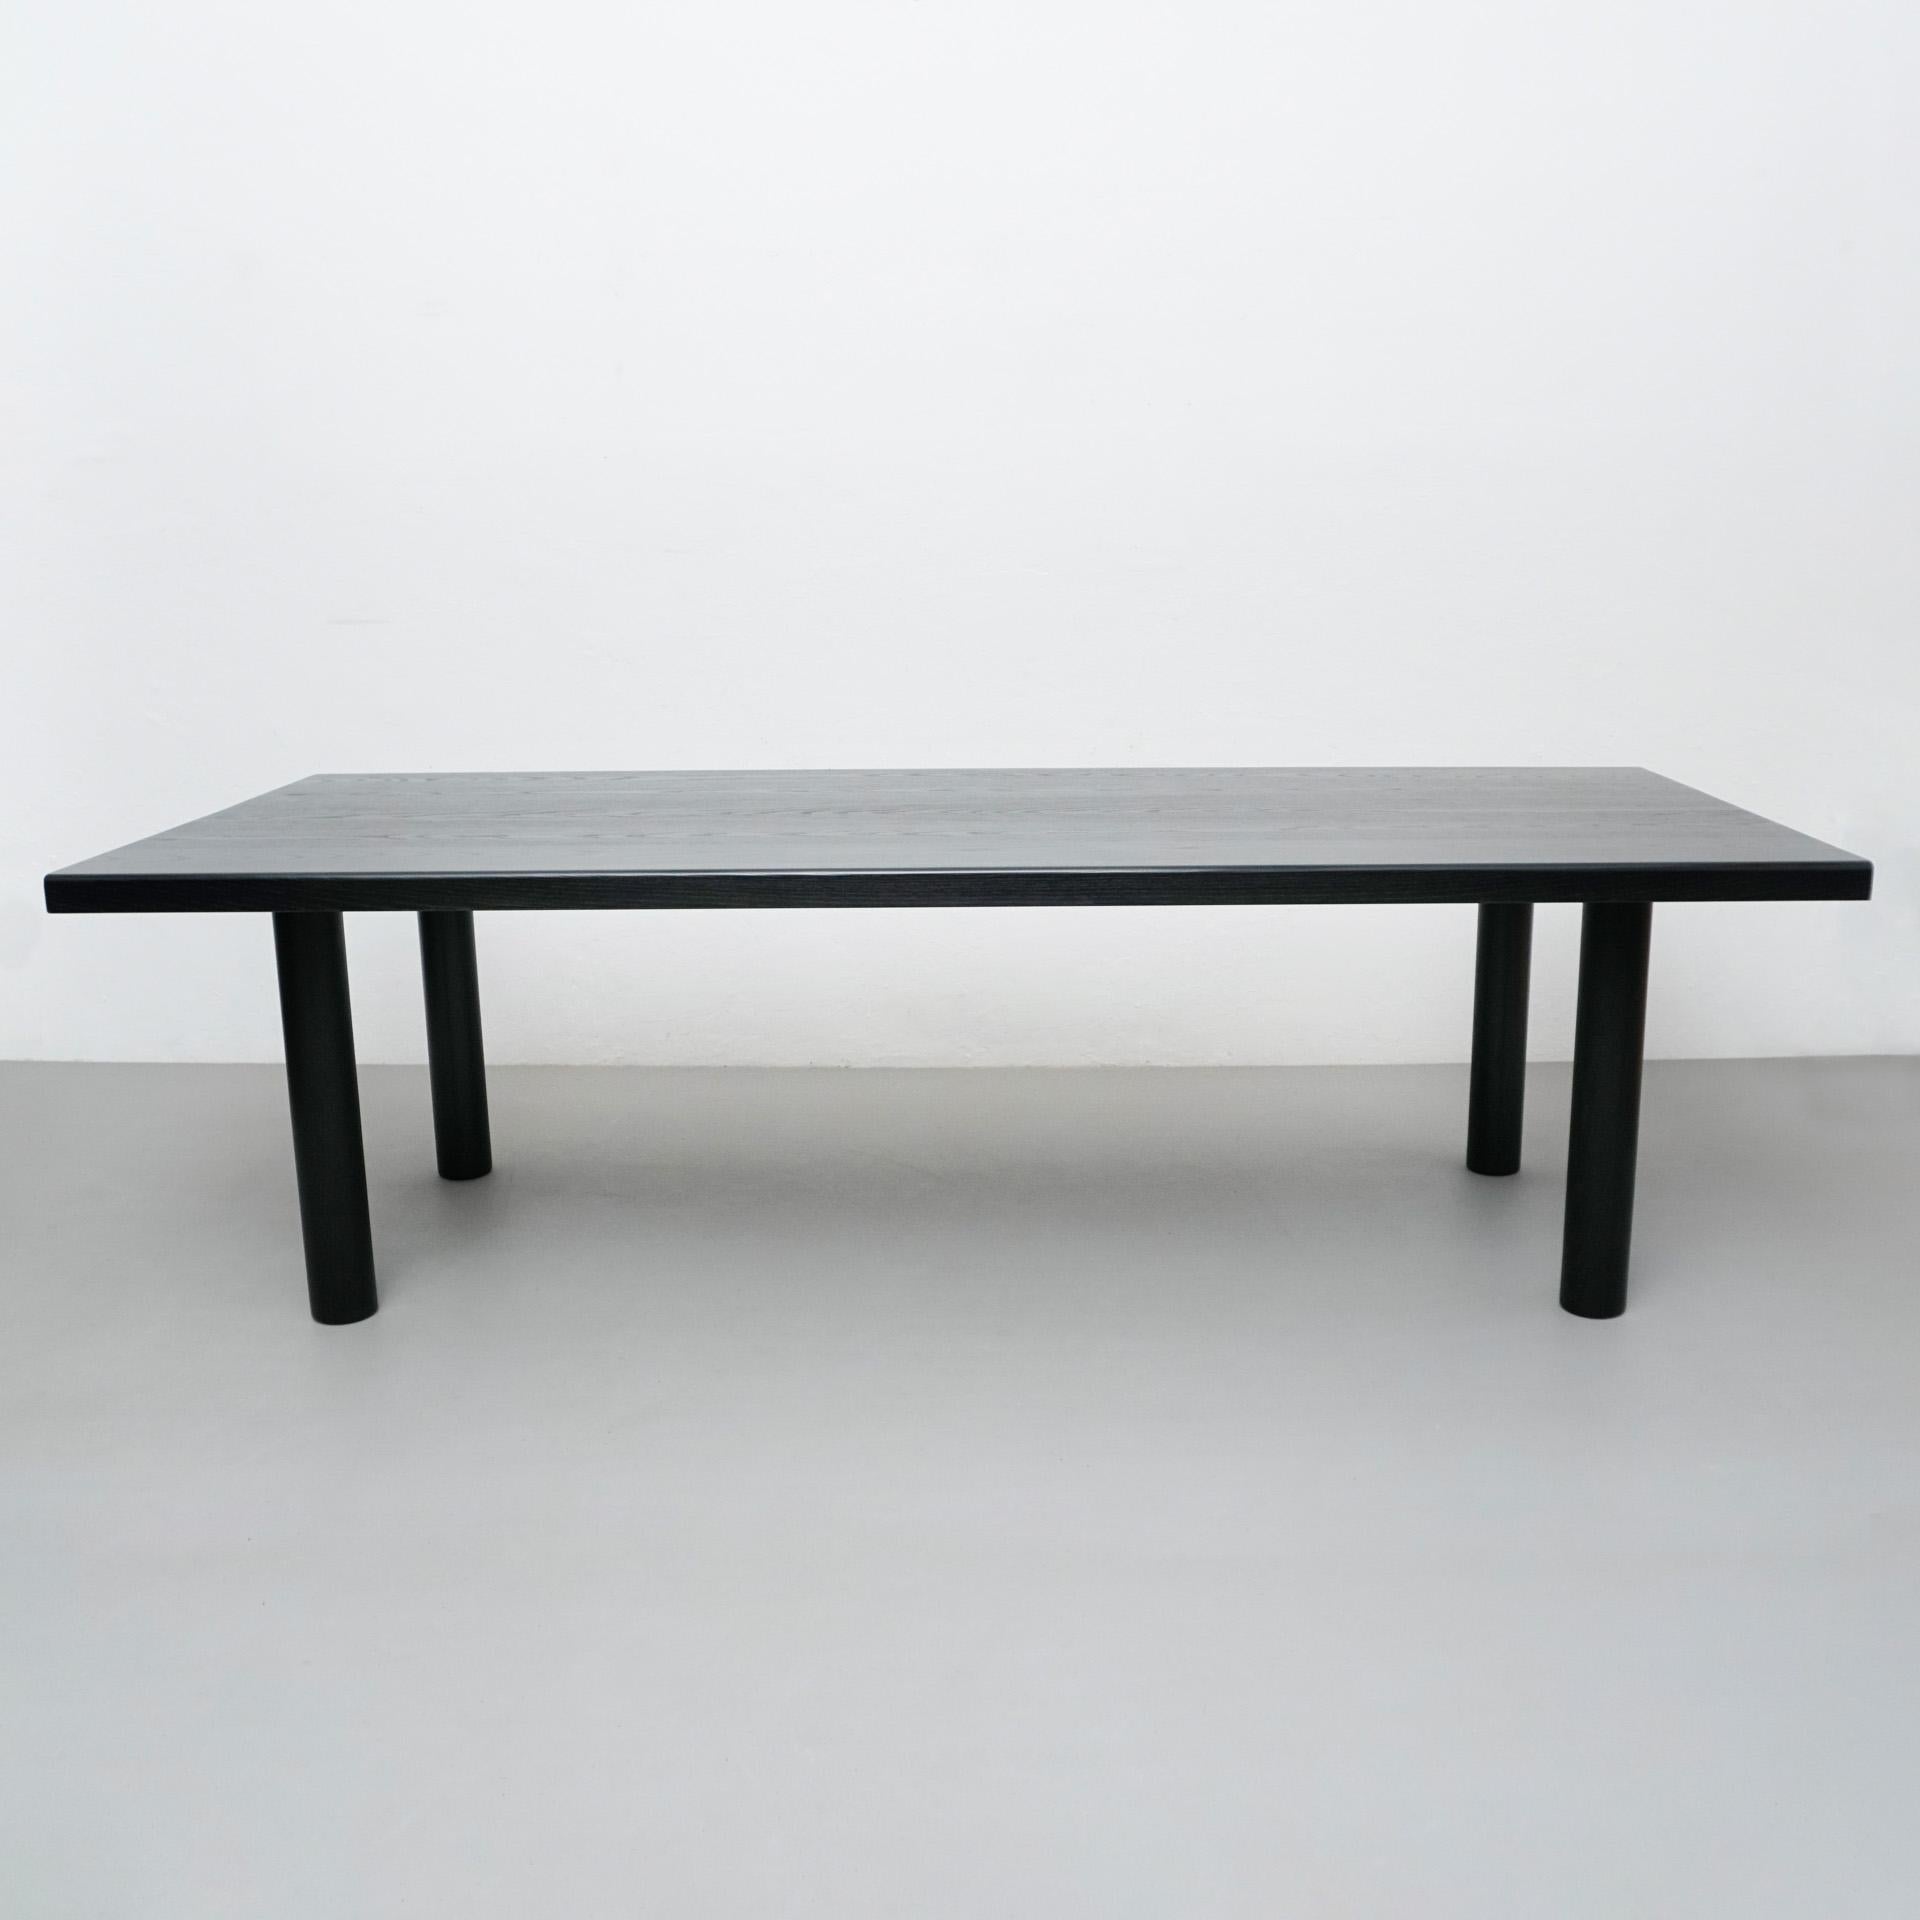 Dada Est. Contemporary Solid Ash Wood Black Lacquered Dining Table 3